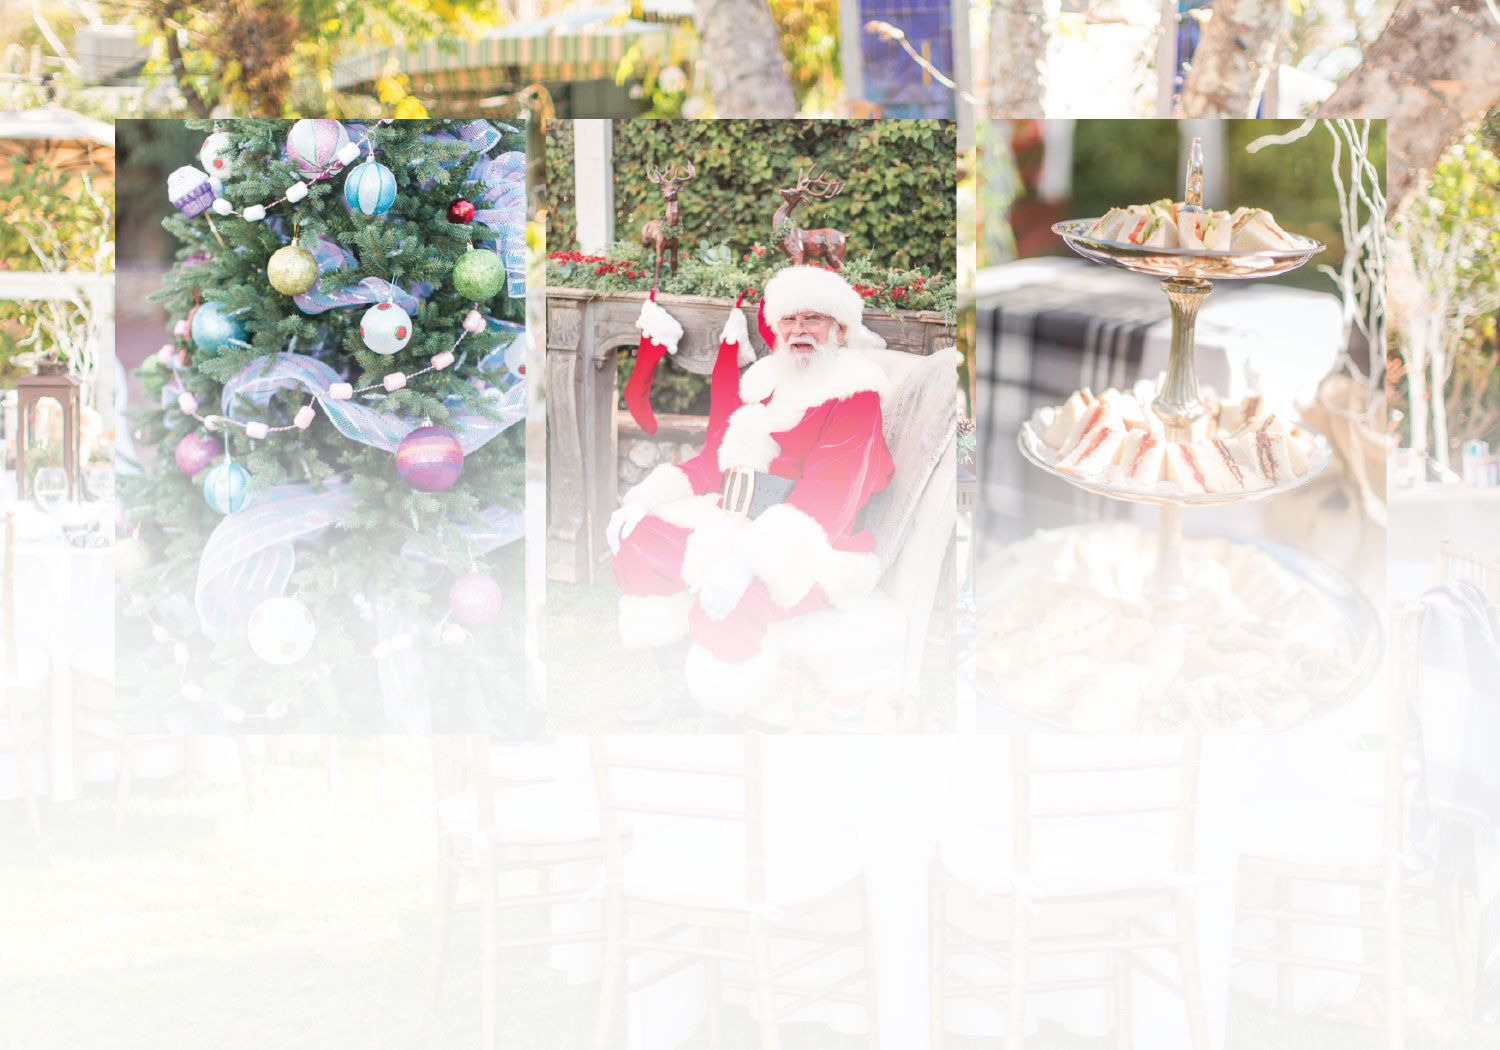 Tea With Santa Upcoming Events Page - December 2nd and 3rd - Book Now!